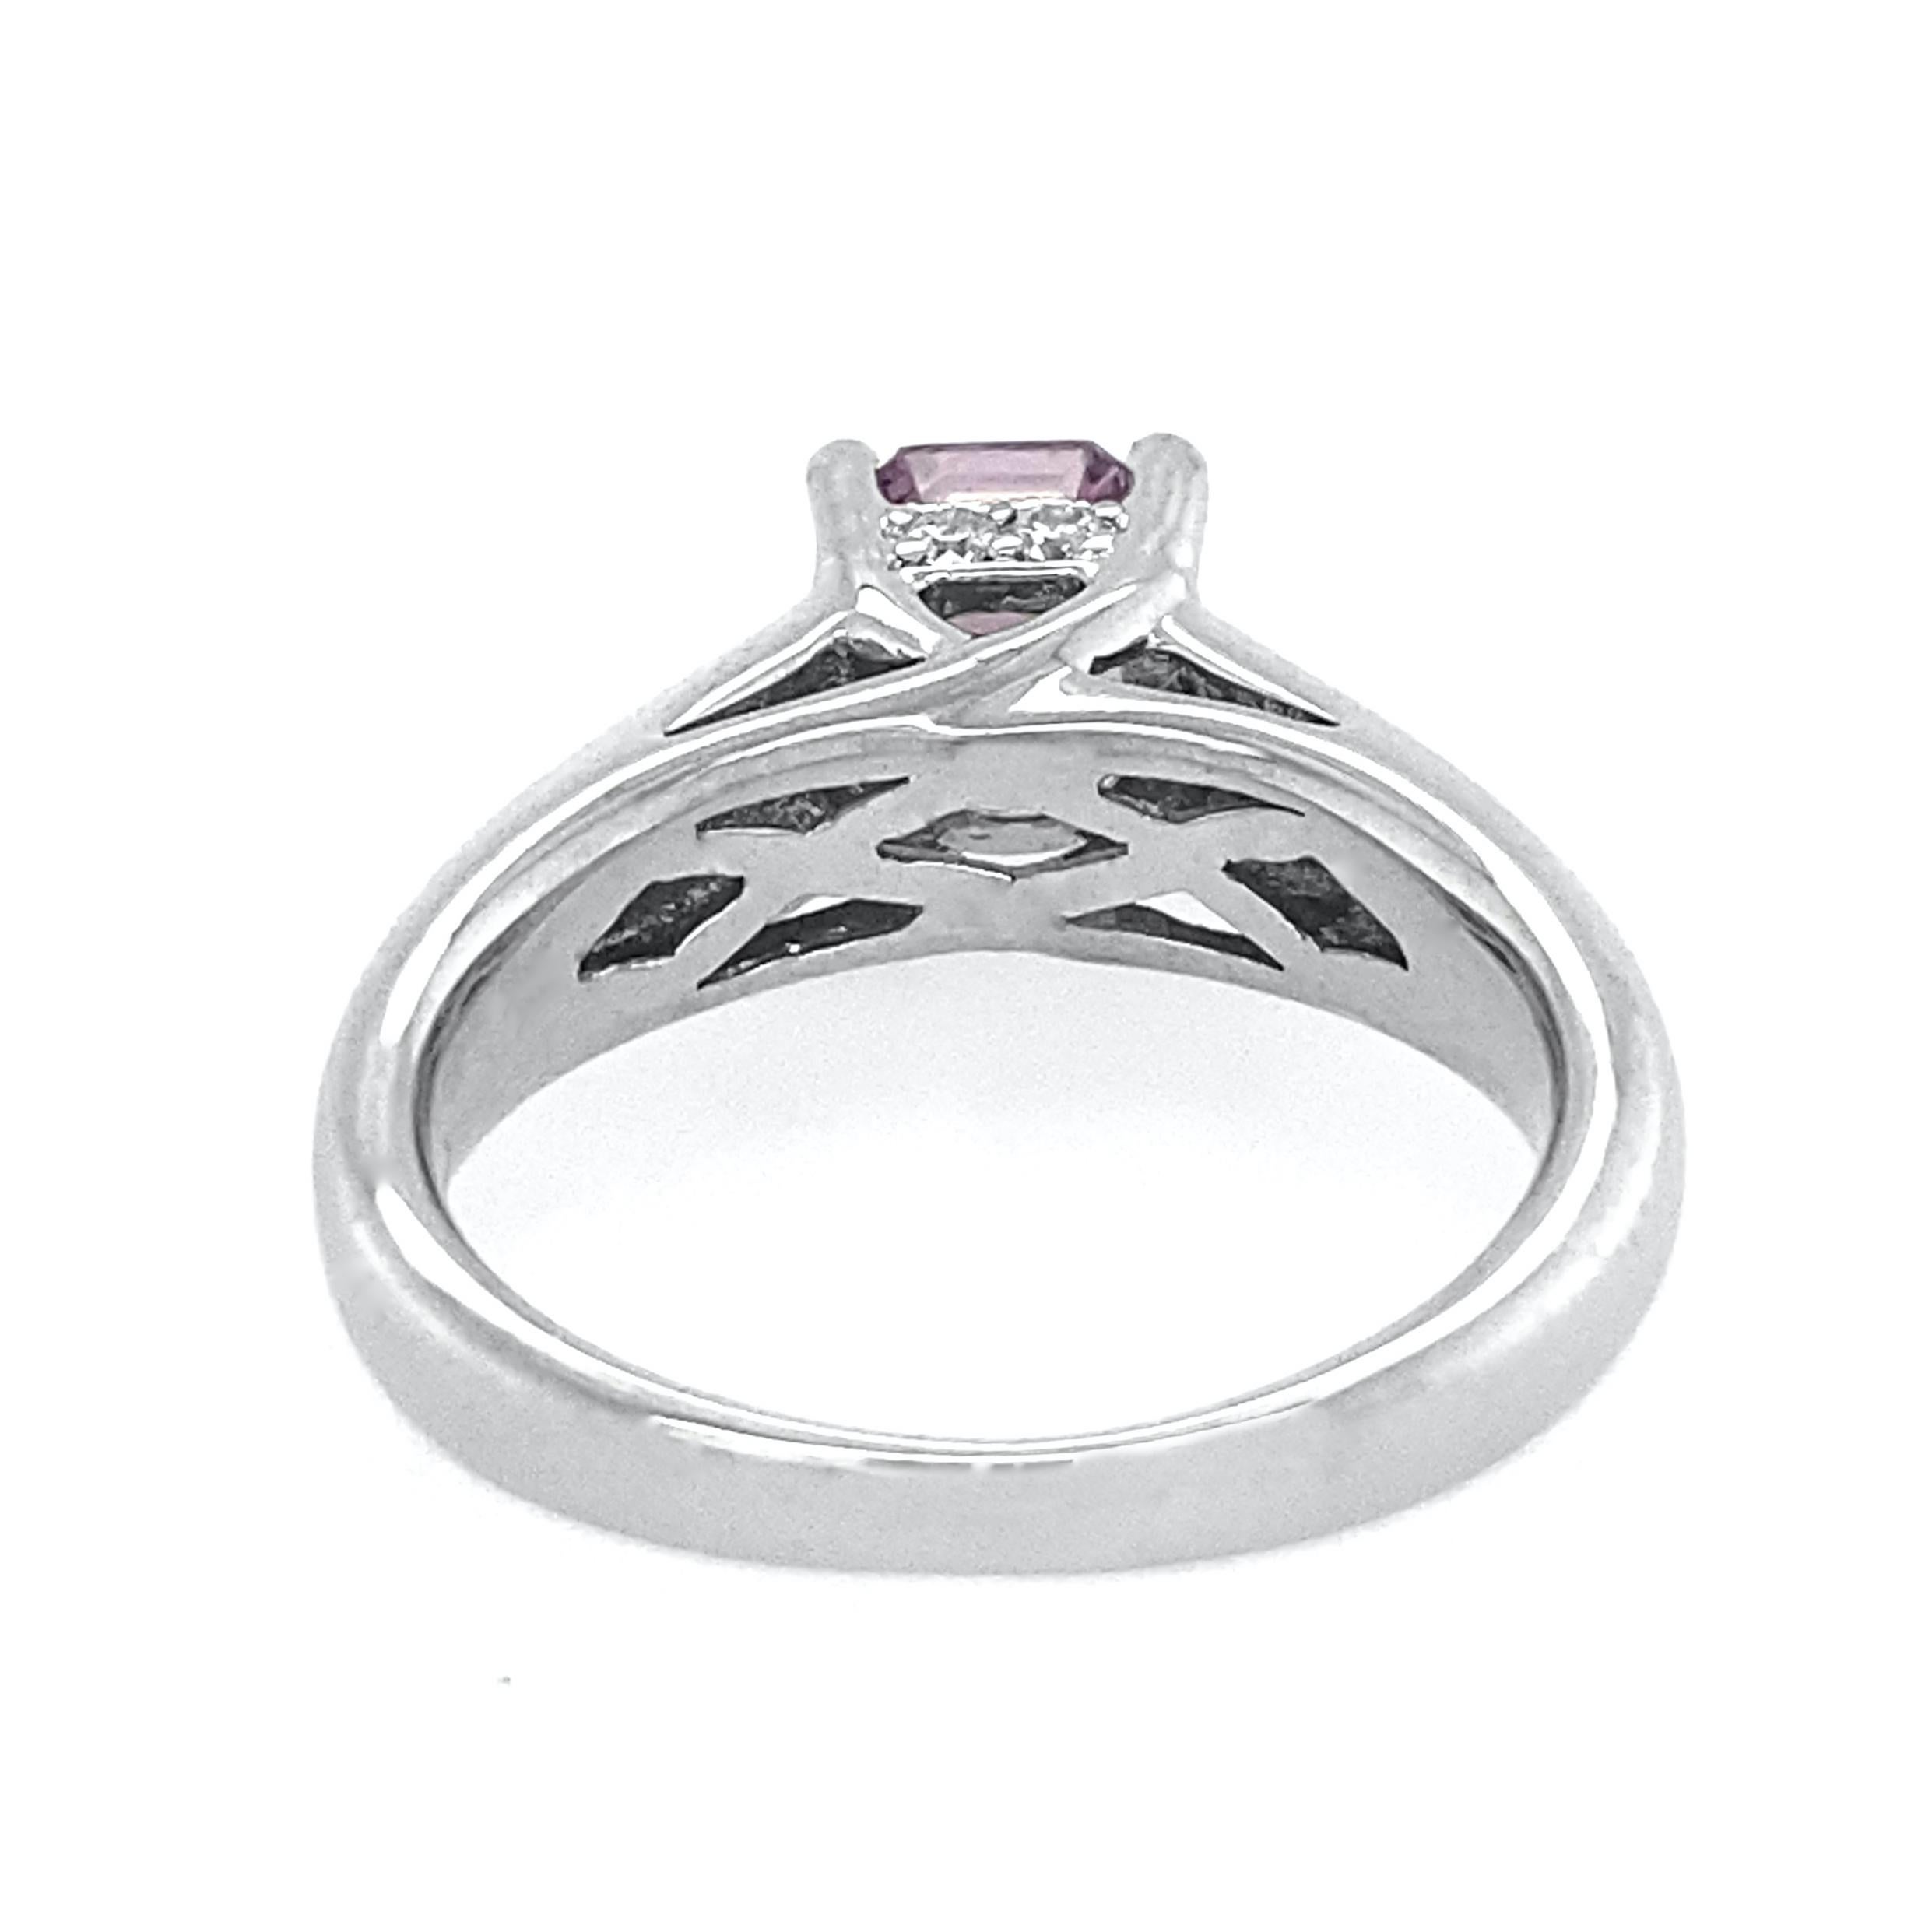 Mauve Spinel Set in Circa 2000 White Gold Solitaire with Diamond Accents 5